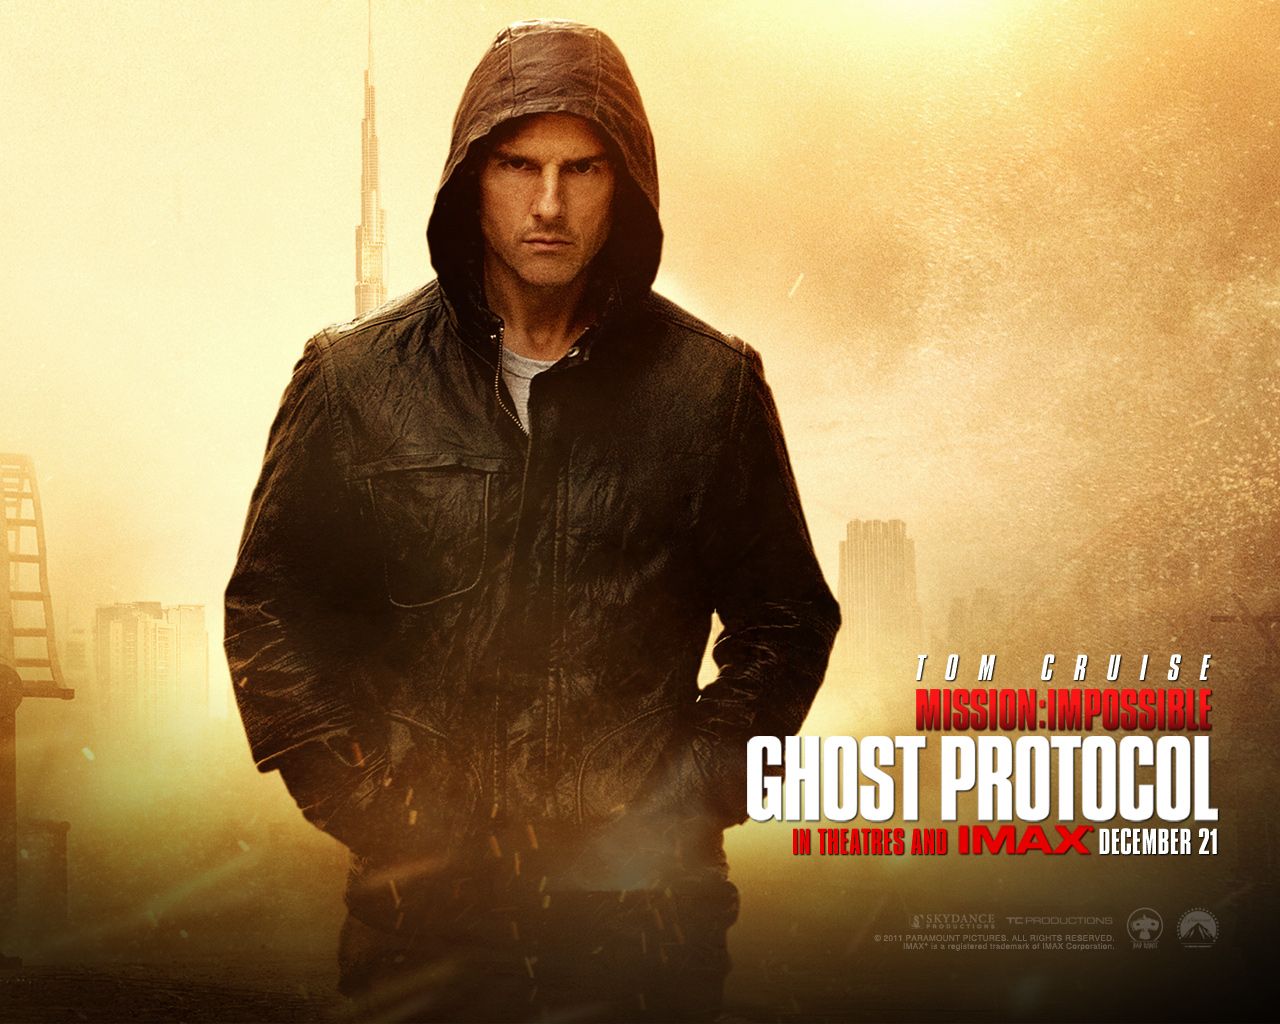 Download Free HD Wallpaper Widescreen Wallpaper for your Desktop: Tom Cruise in Mission Impossible 4